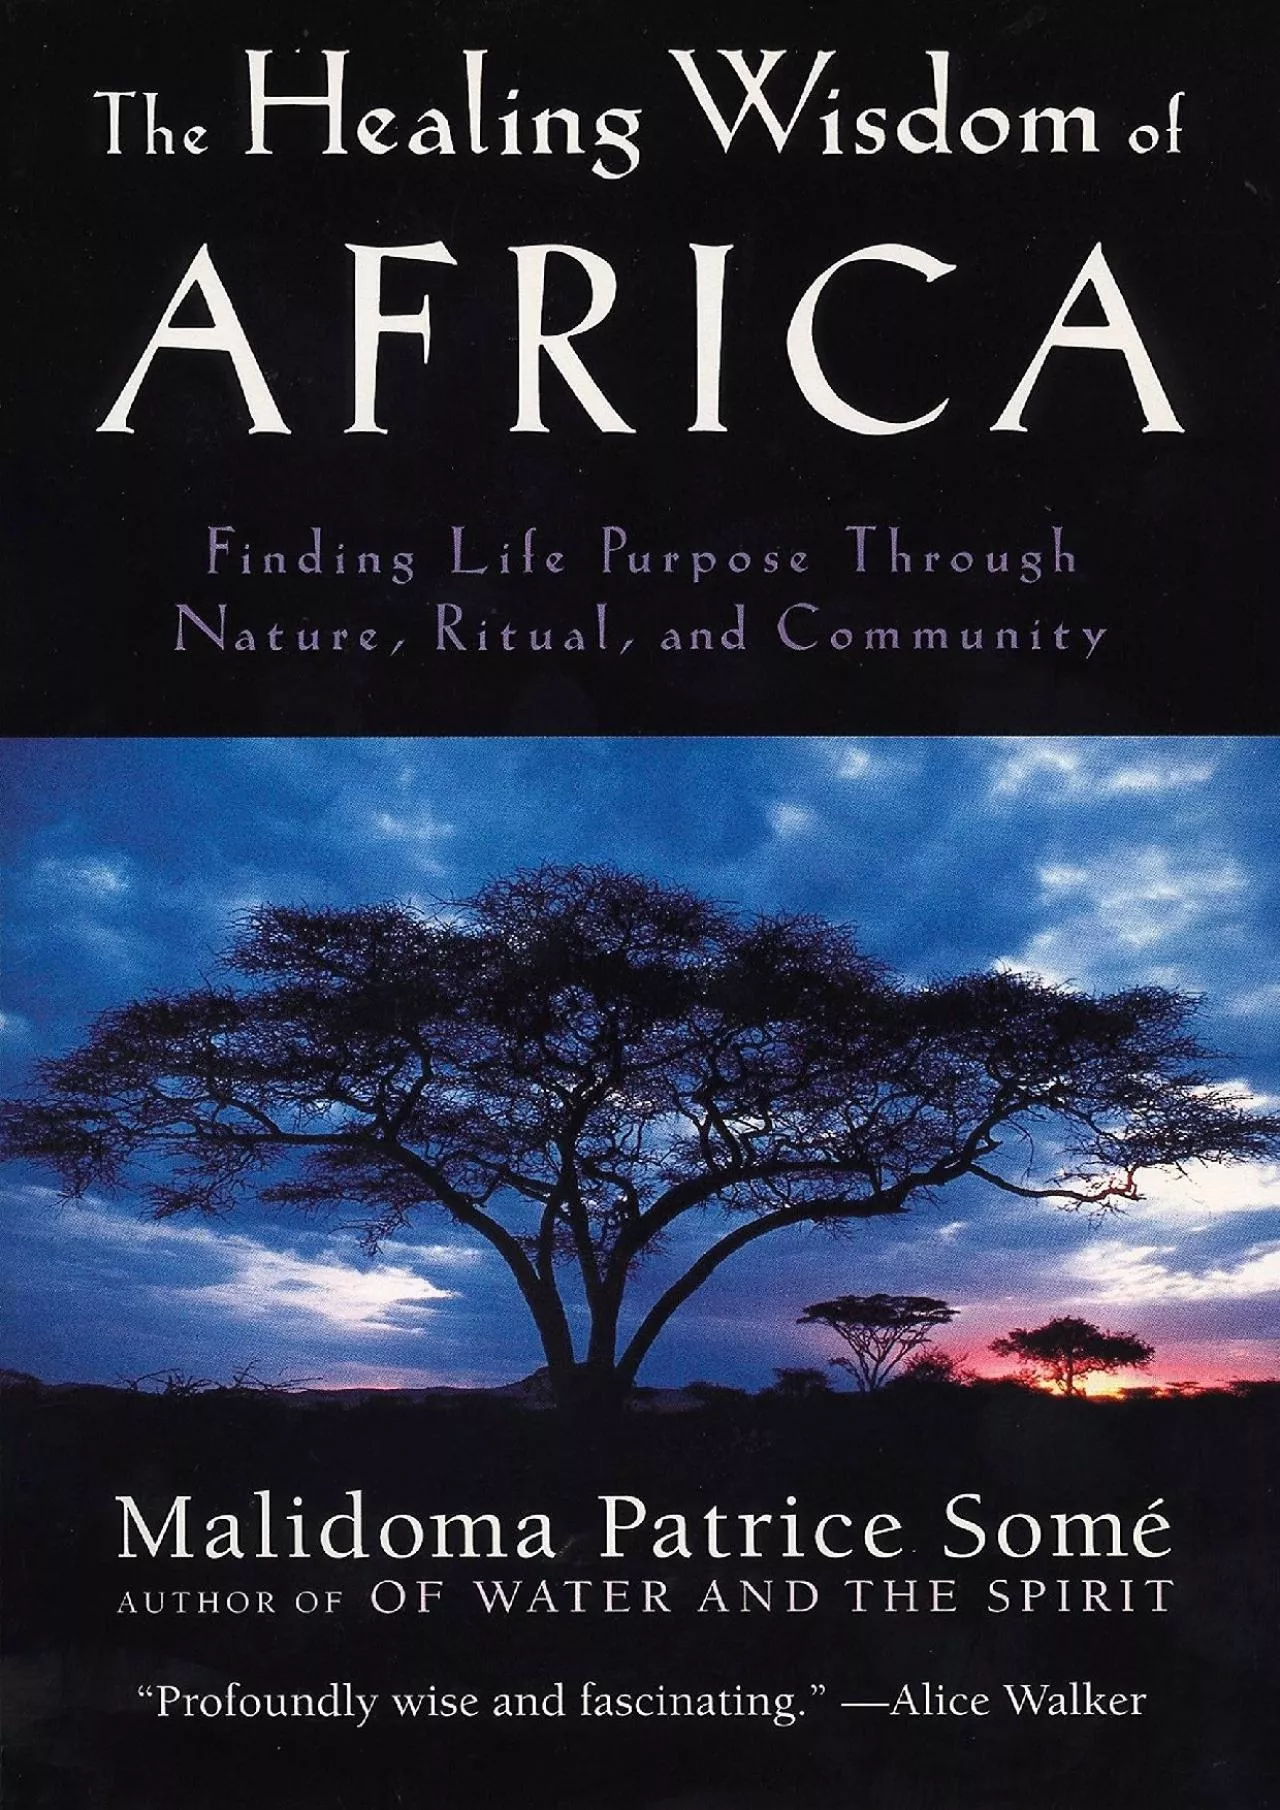 (EBOOK)-The Healing Wisdom of Africa: Finding Life Purpose Through Nature, Ritual, and